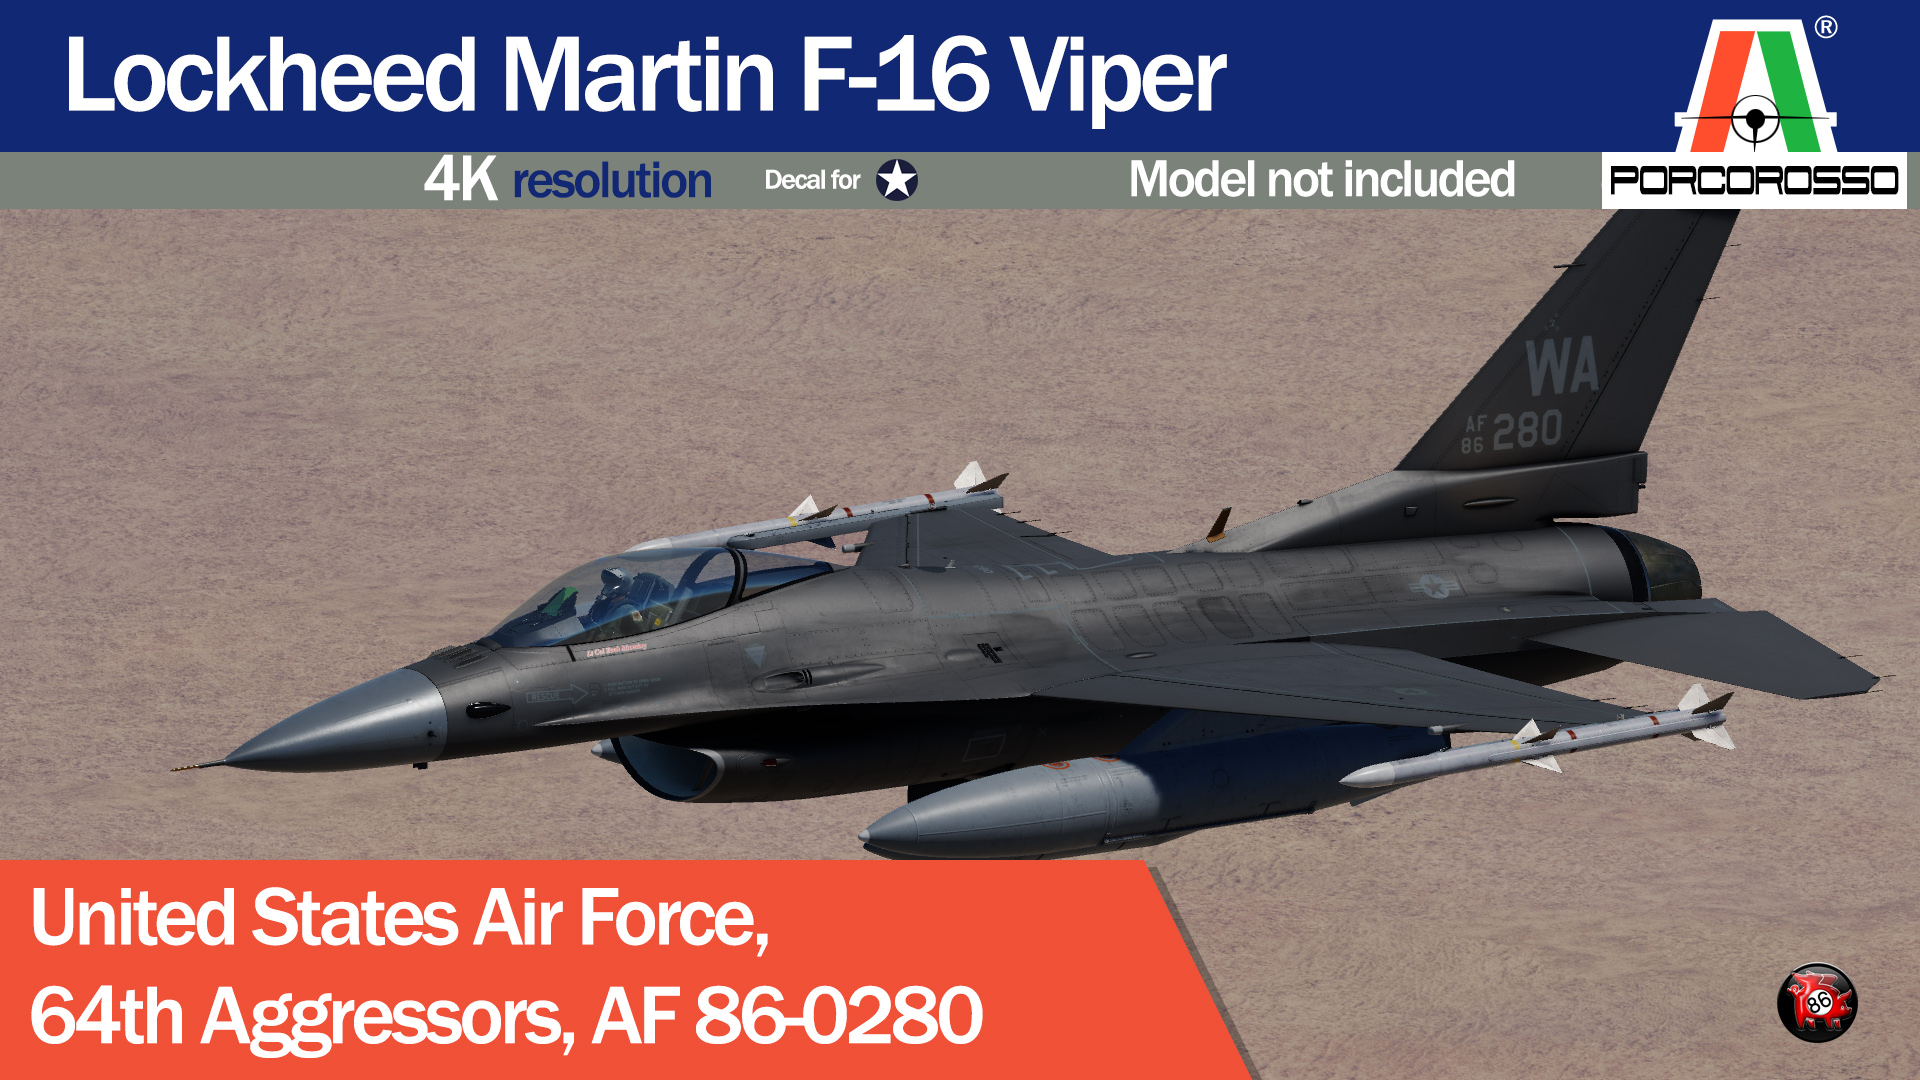 USAF 64th Aggressors Have Glass V, AF 86-280 by PorcoRosso86 UPDATE